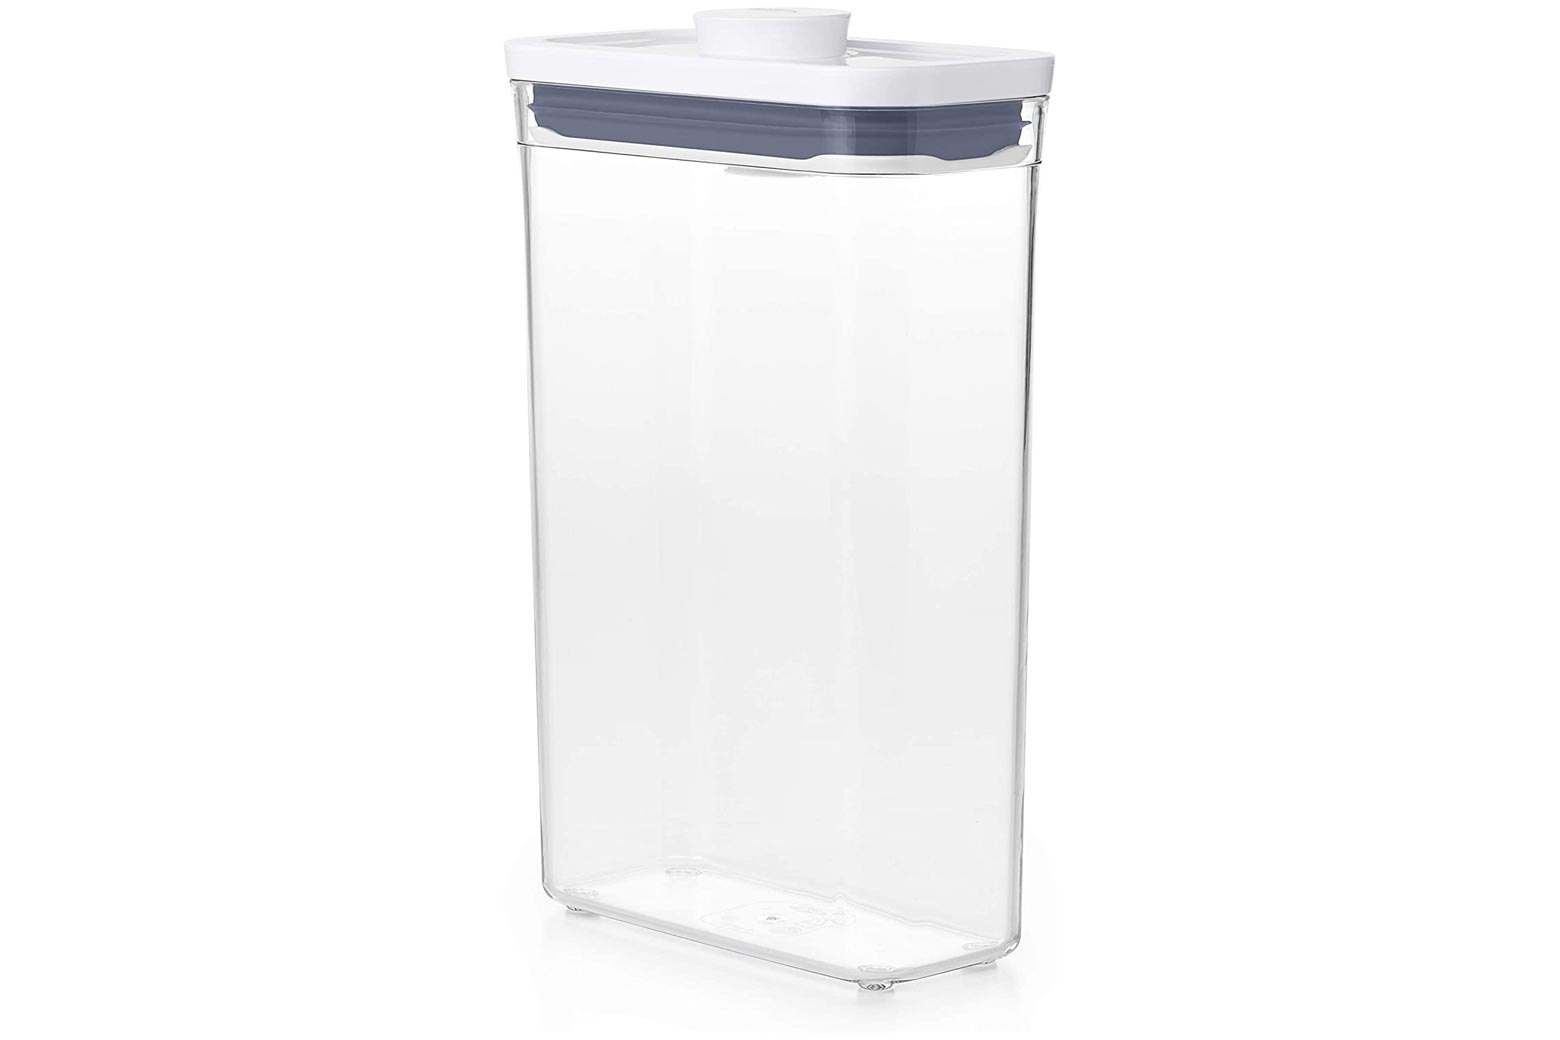 Tall airtight food container